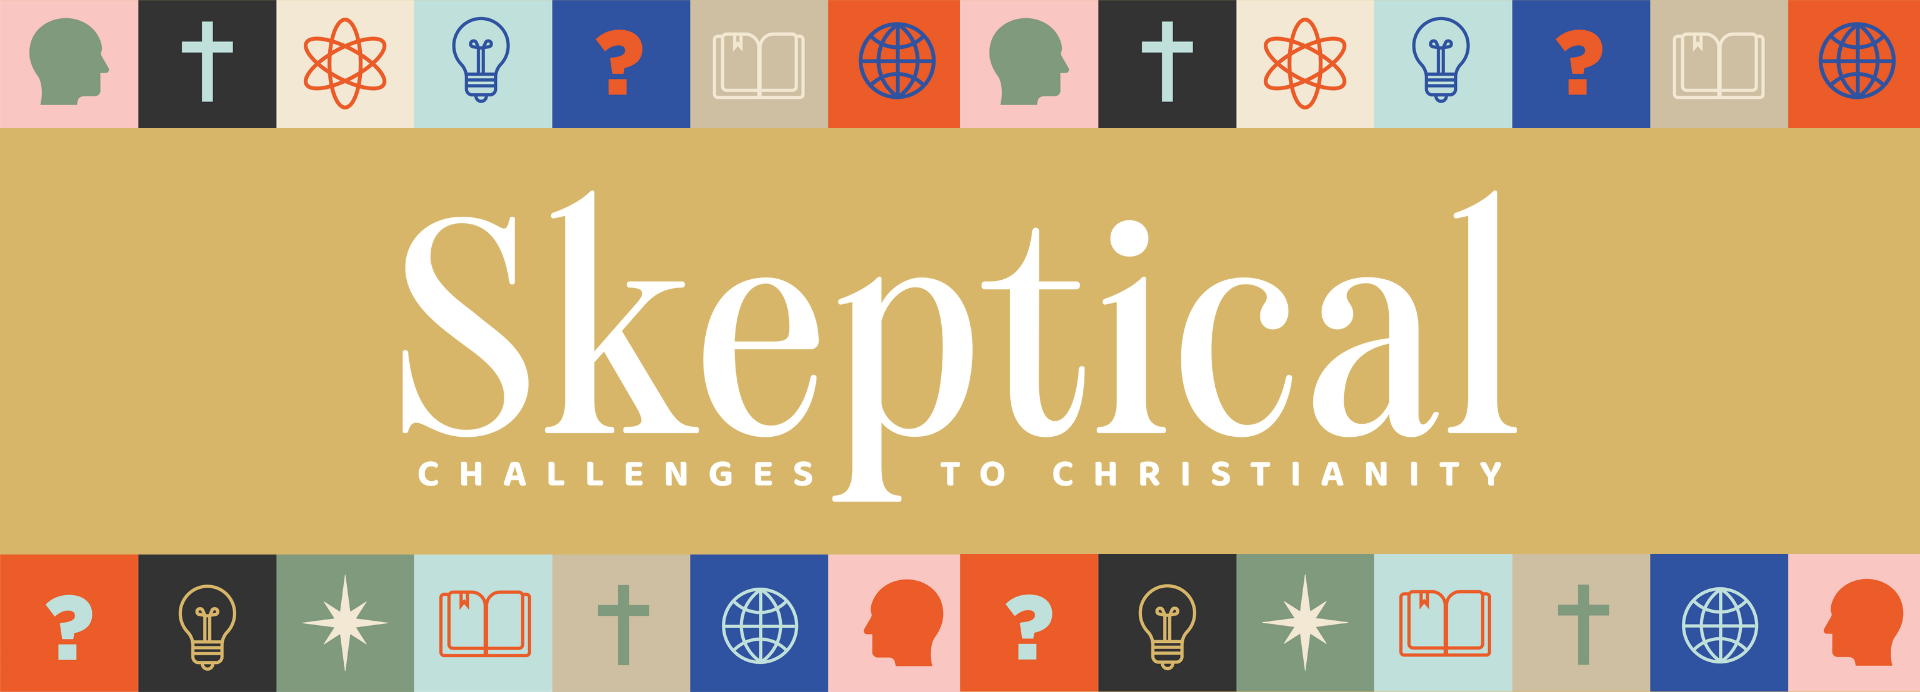 Skeptical: Challenges to Christianity